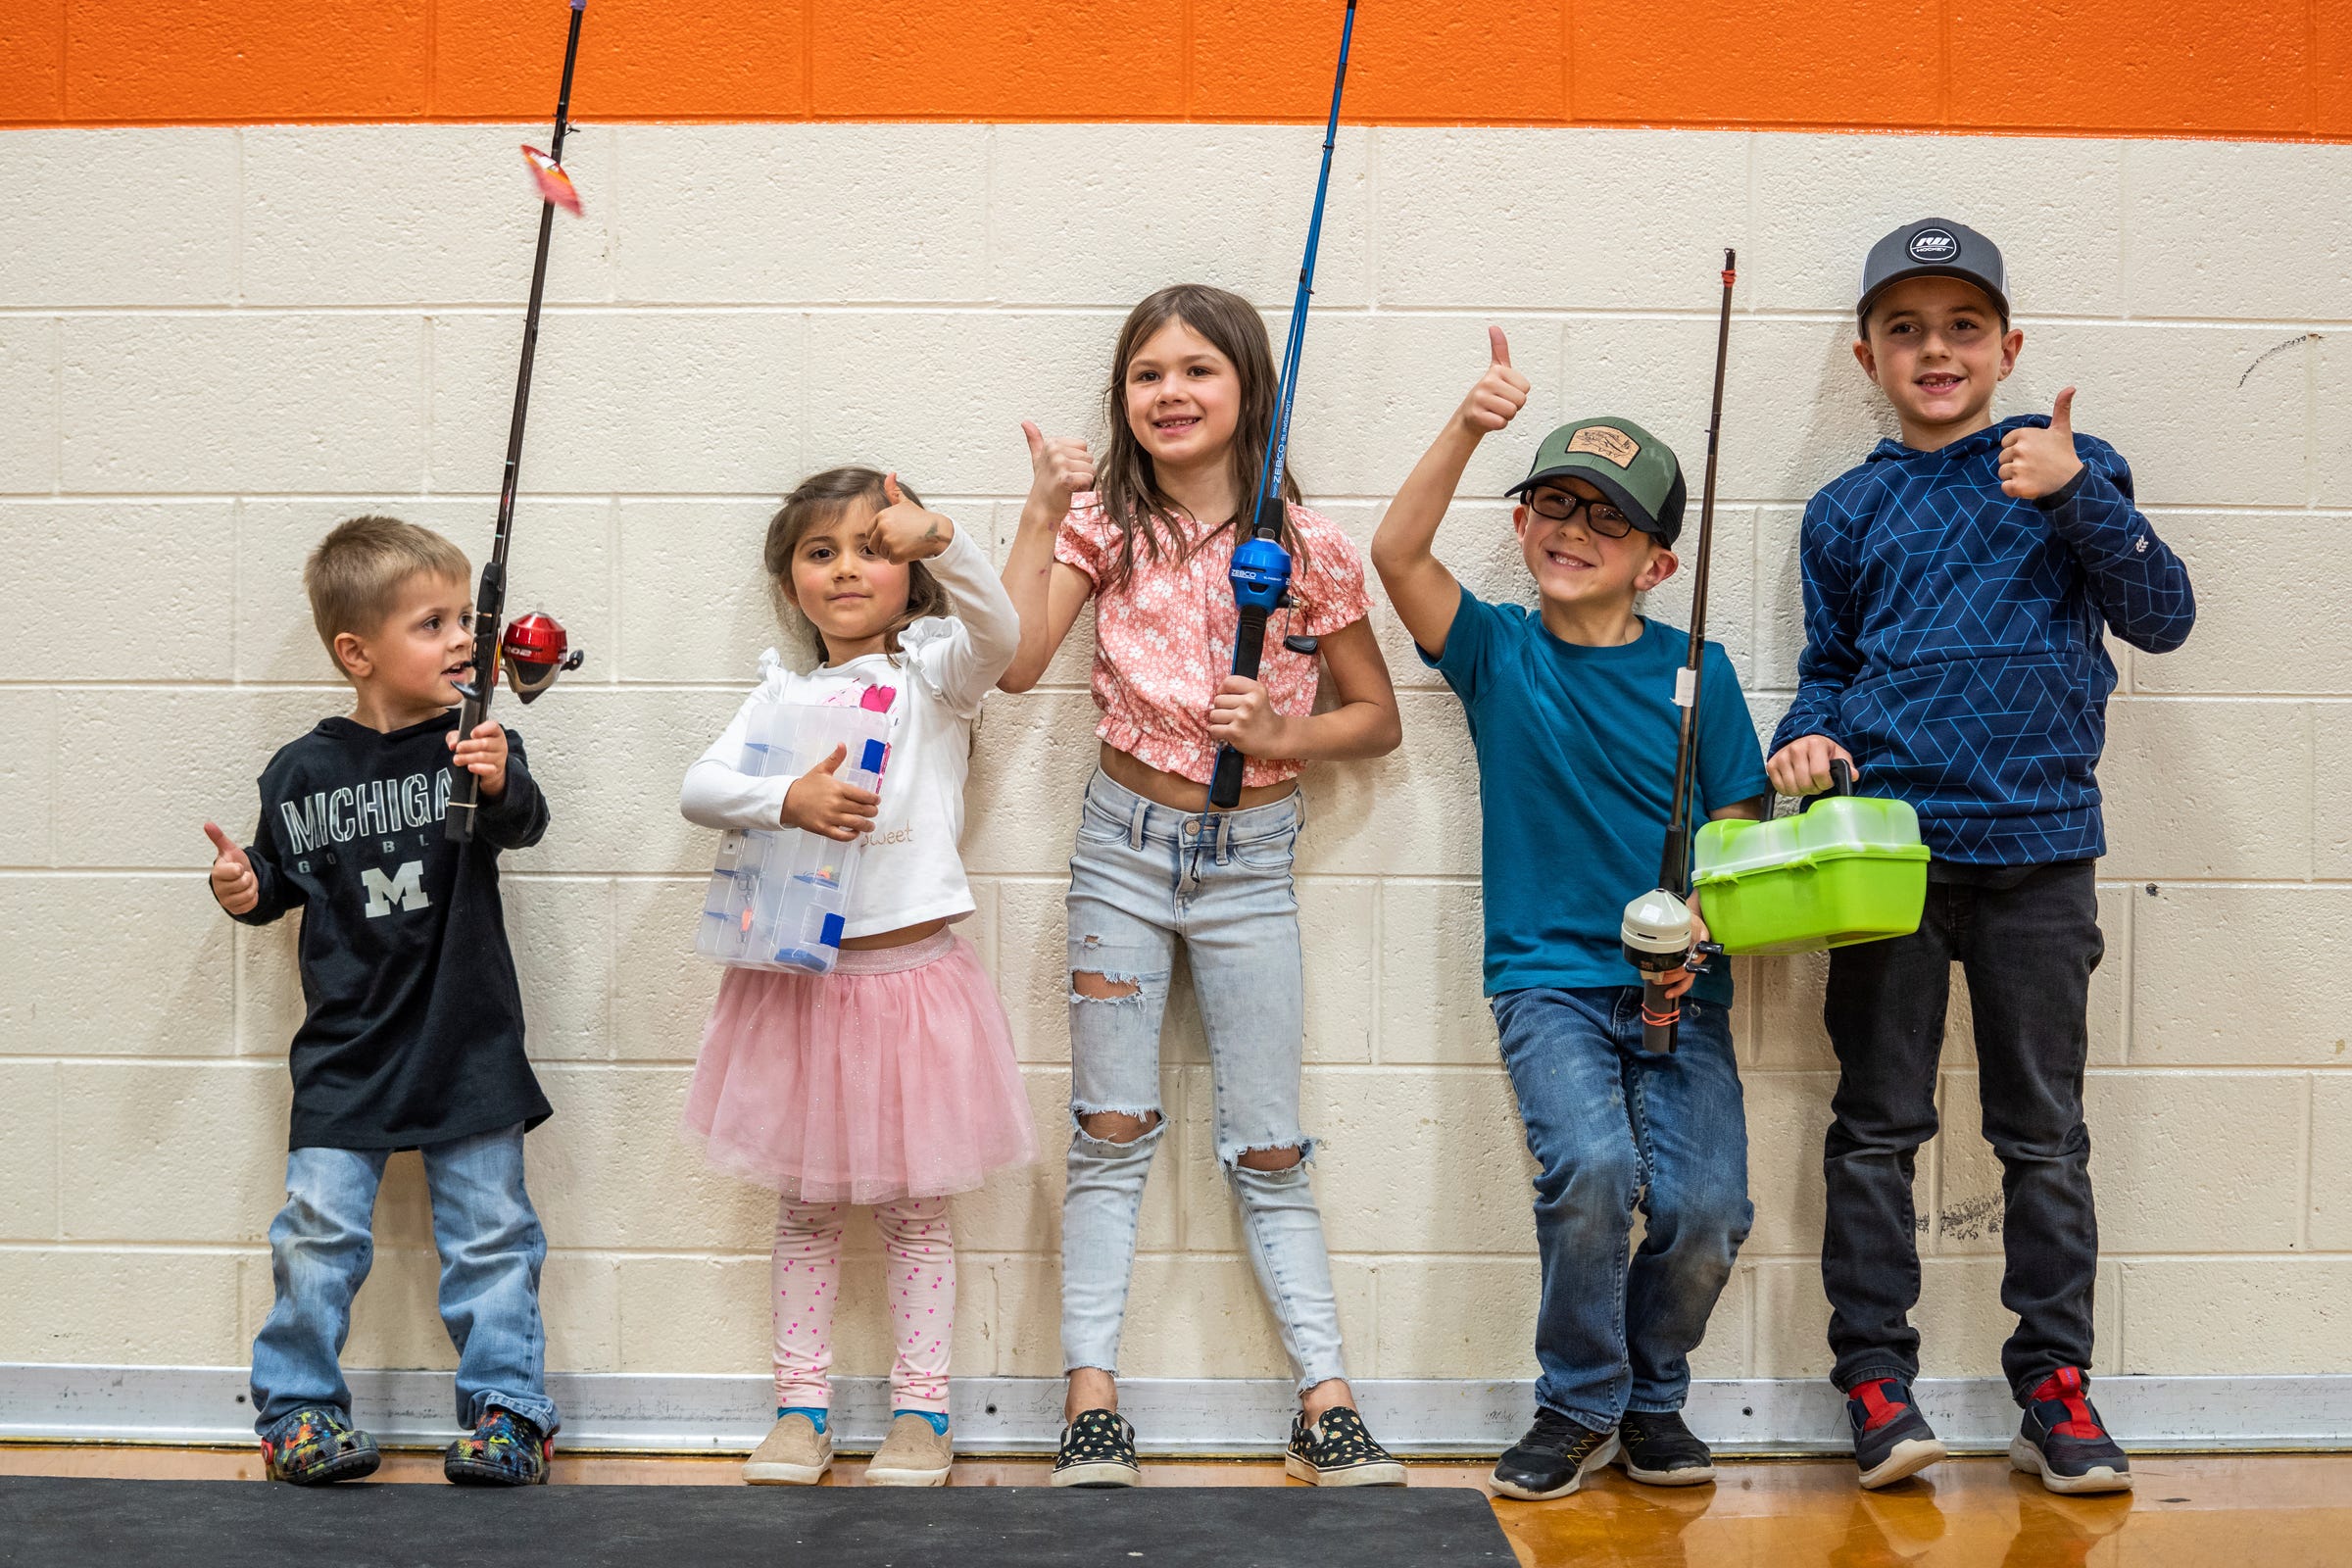 Oliver Clickner, left, Brynlee Bruno, Brielle Chamberlain, Liam McNamara and Mason Green McNamara, all of Newberry, pose for a photo taken by their parents during the 65th annual Kids Tackle Party at Newberry High School put on by the Tahquamenon Sportsmen's Club in Newberry on Saturday, April 22, 2023, in Michigan's Upper Peninsula.